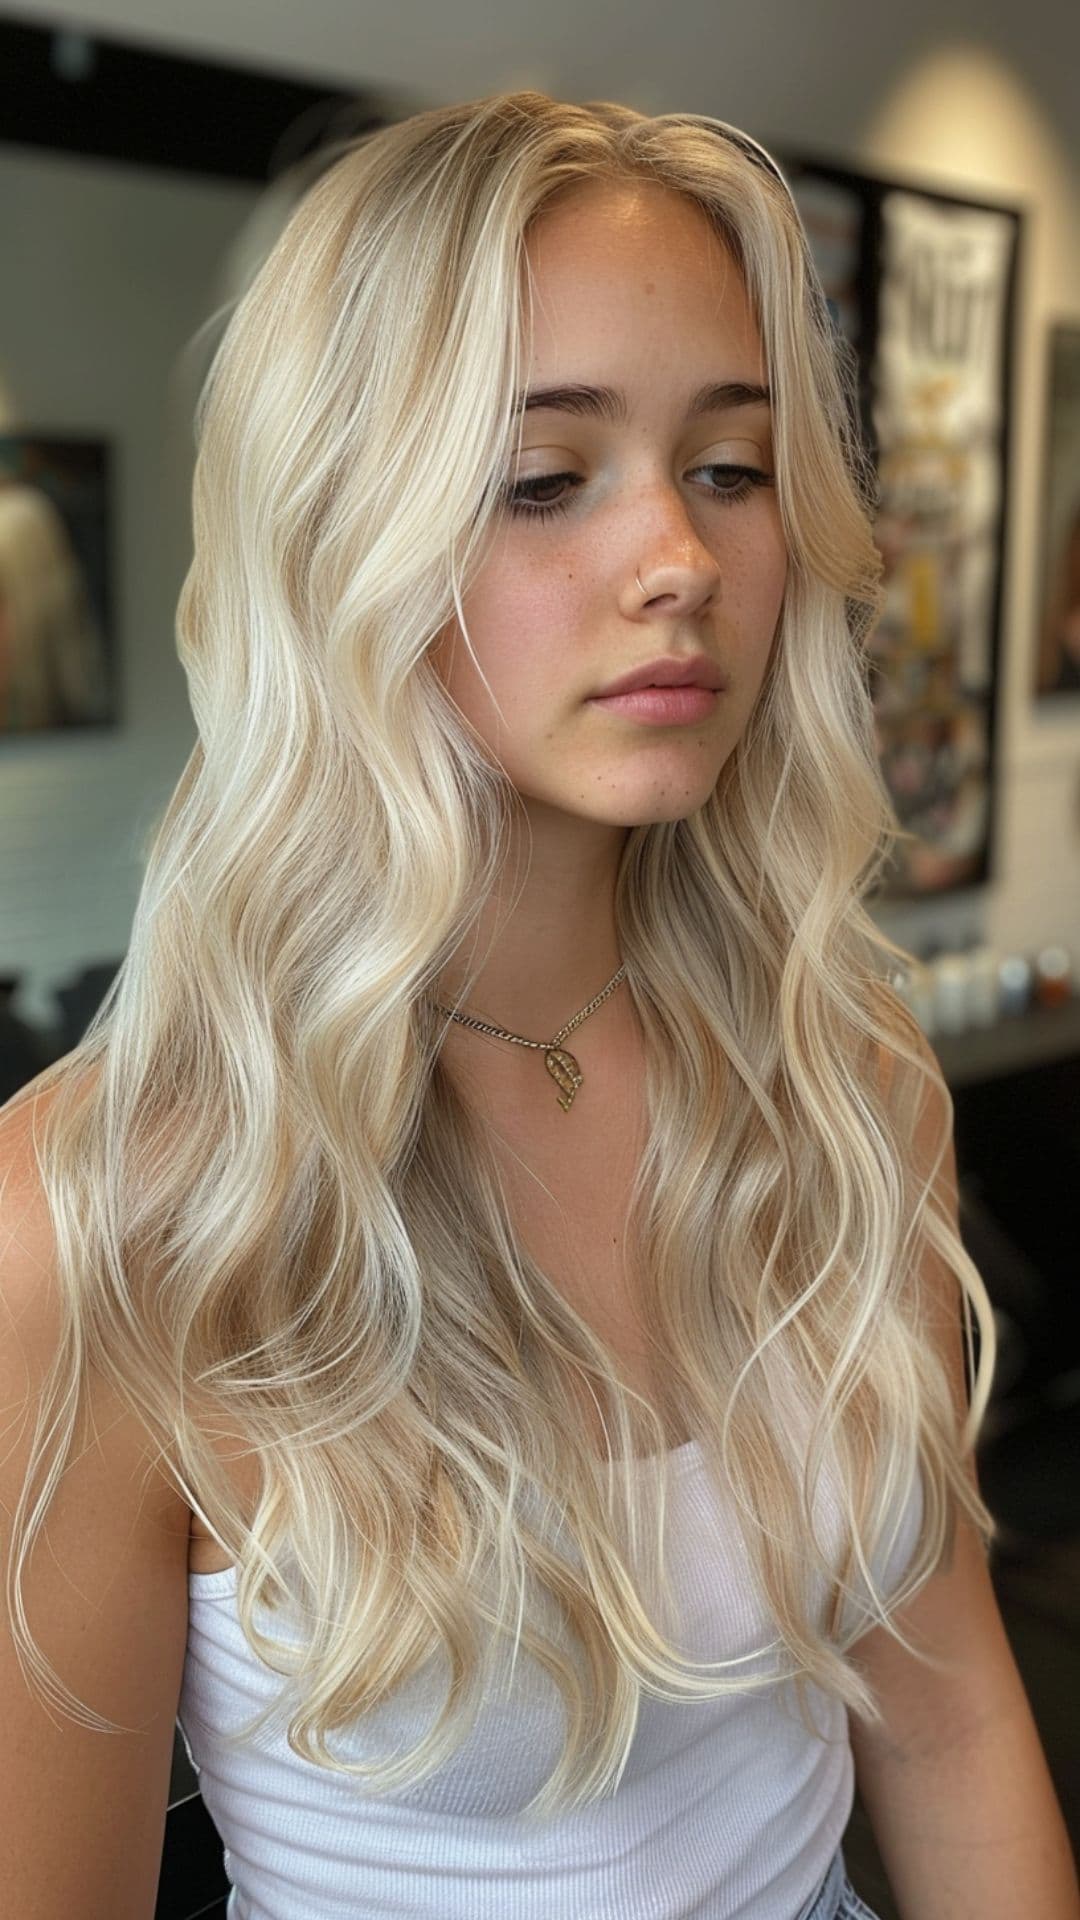 A woman modelling a champagne blonde hair.